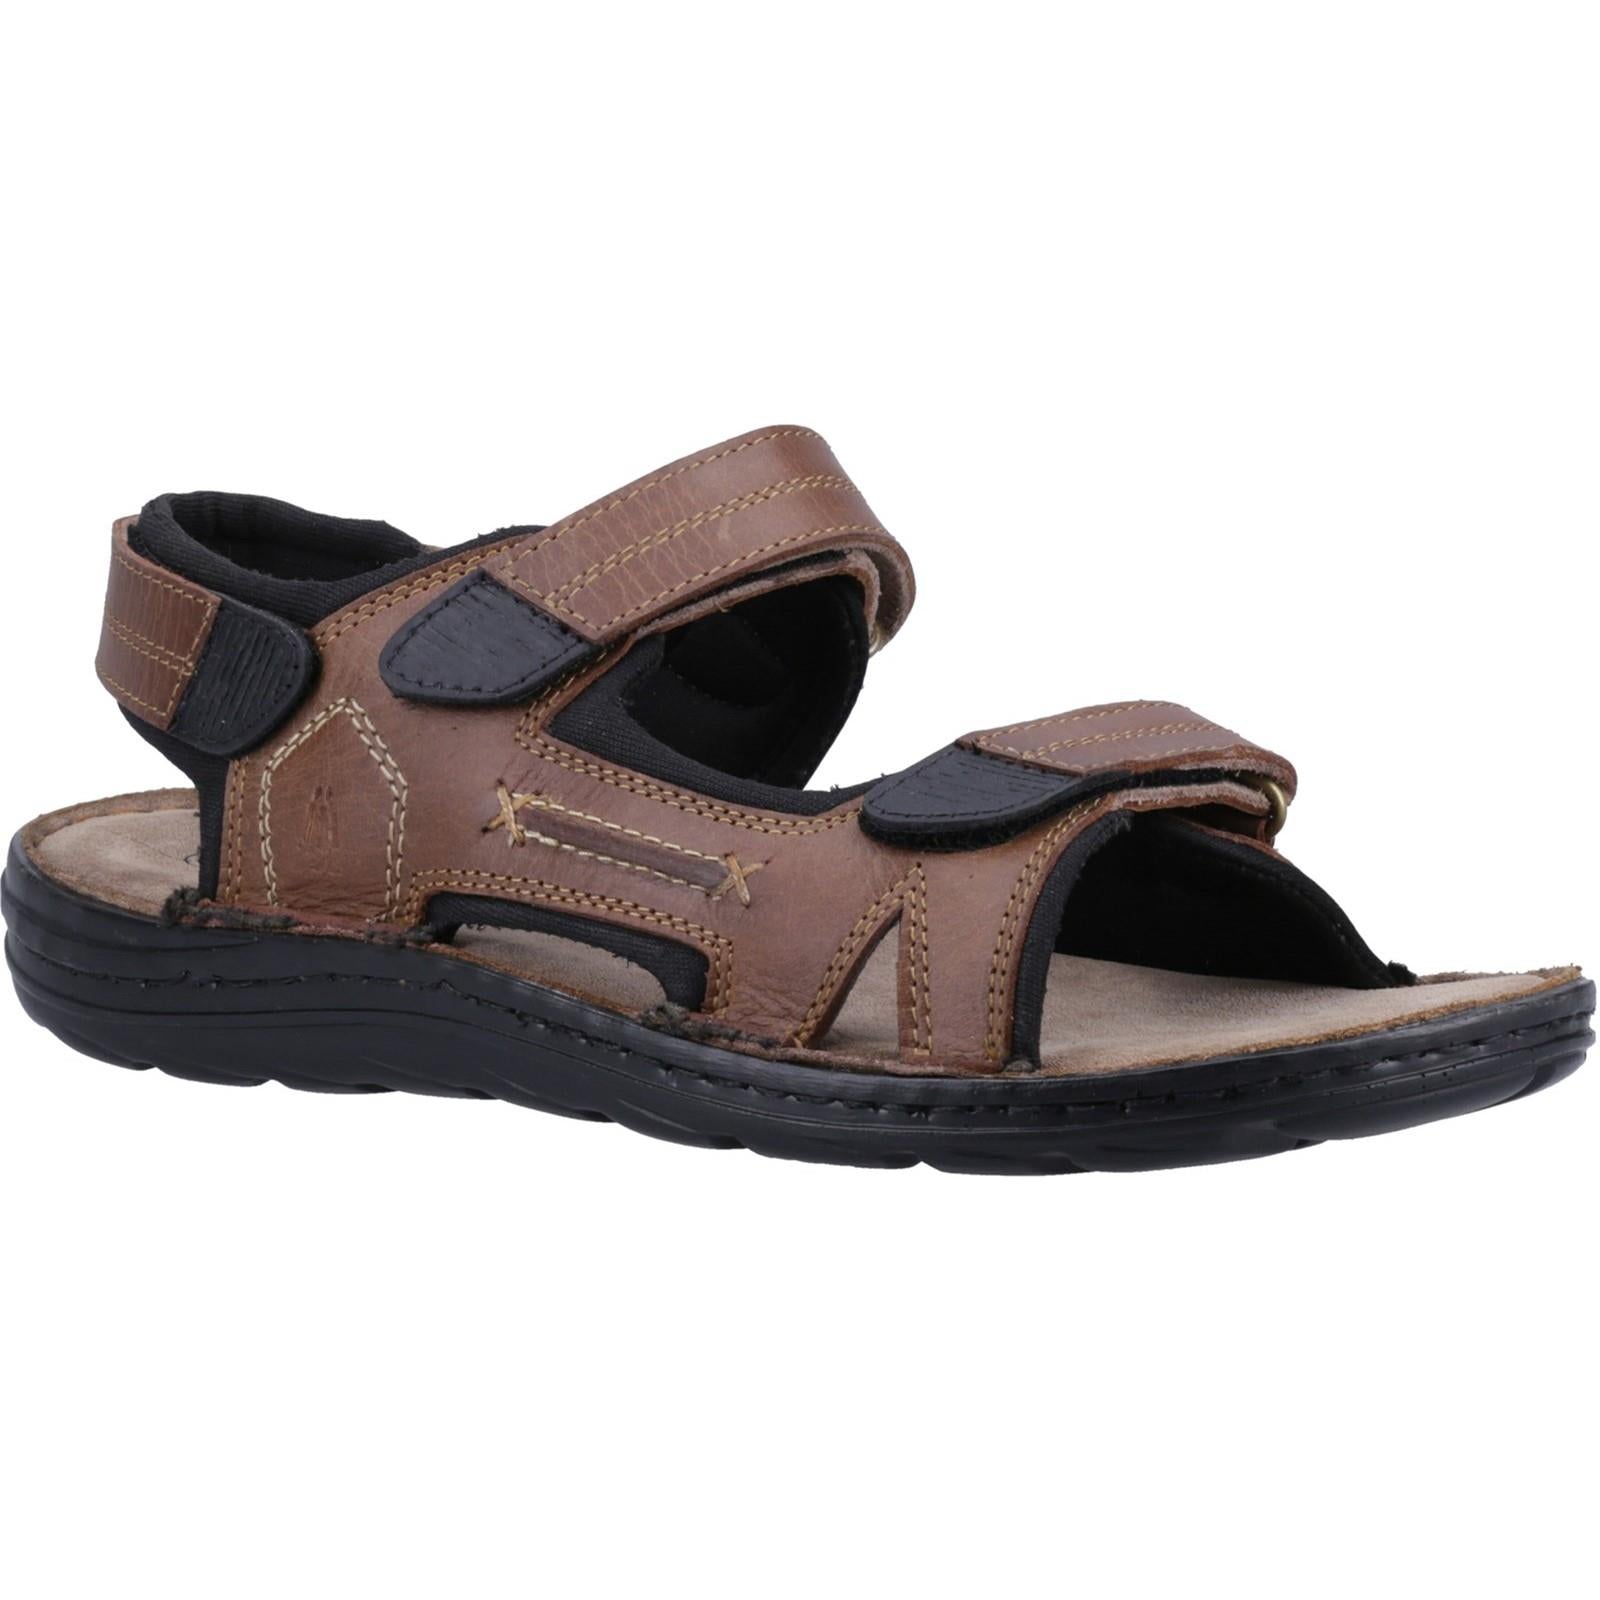 Hush Puppies Alistair tan leather summer touch fastening sandals